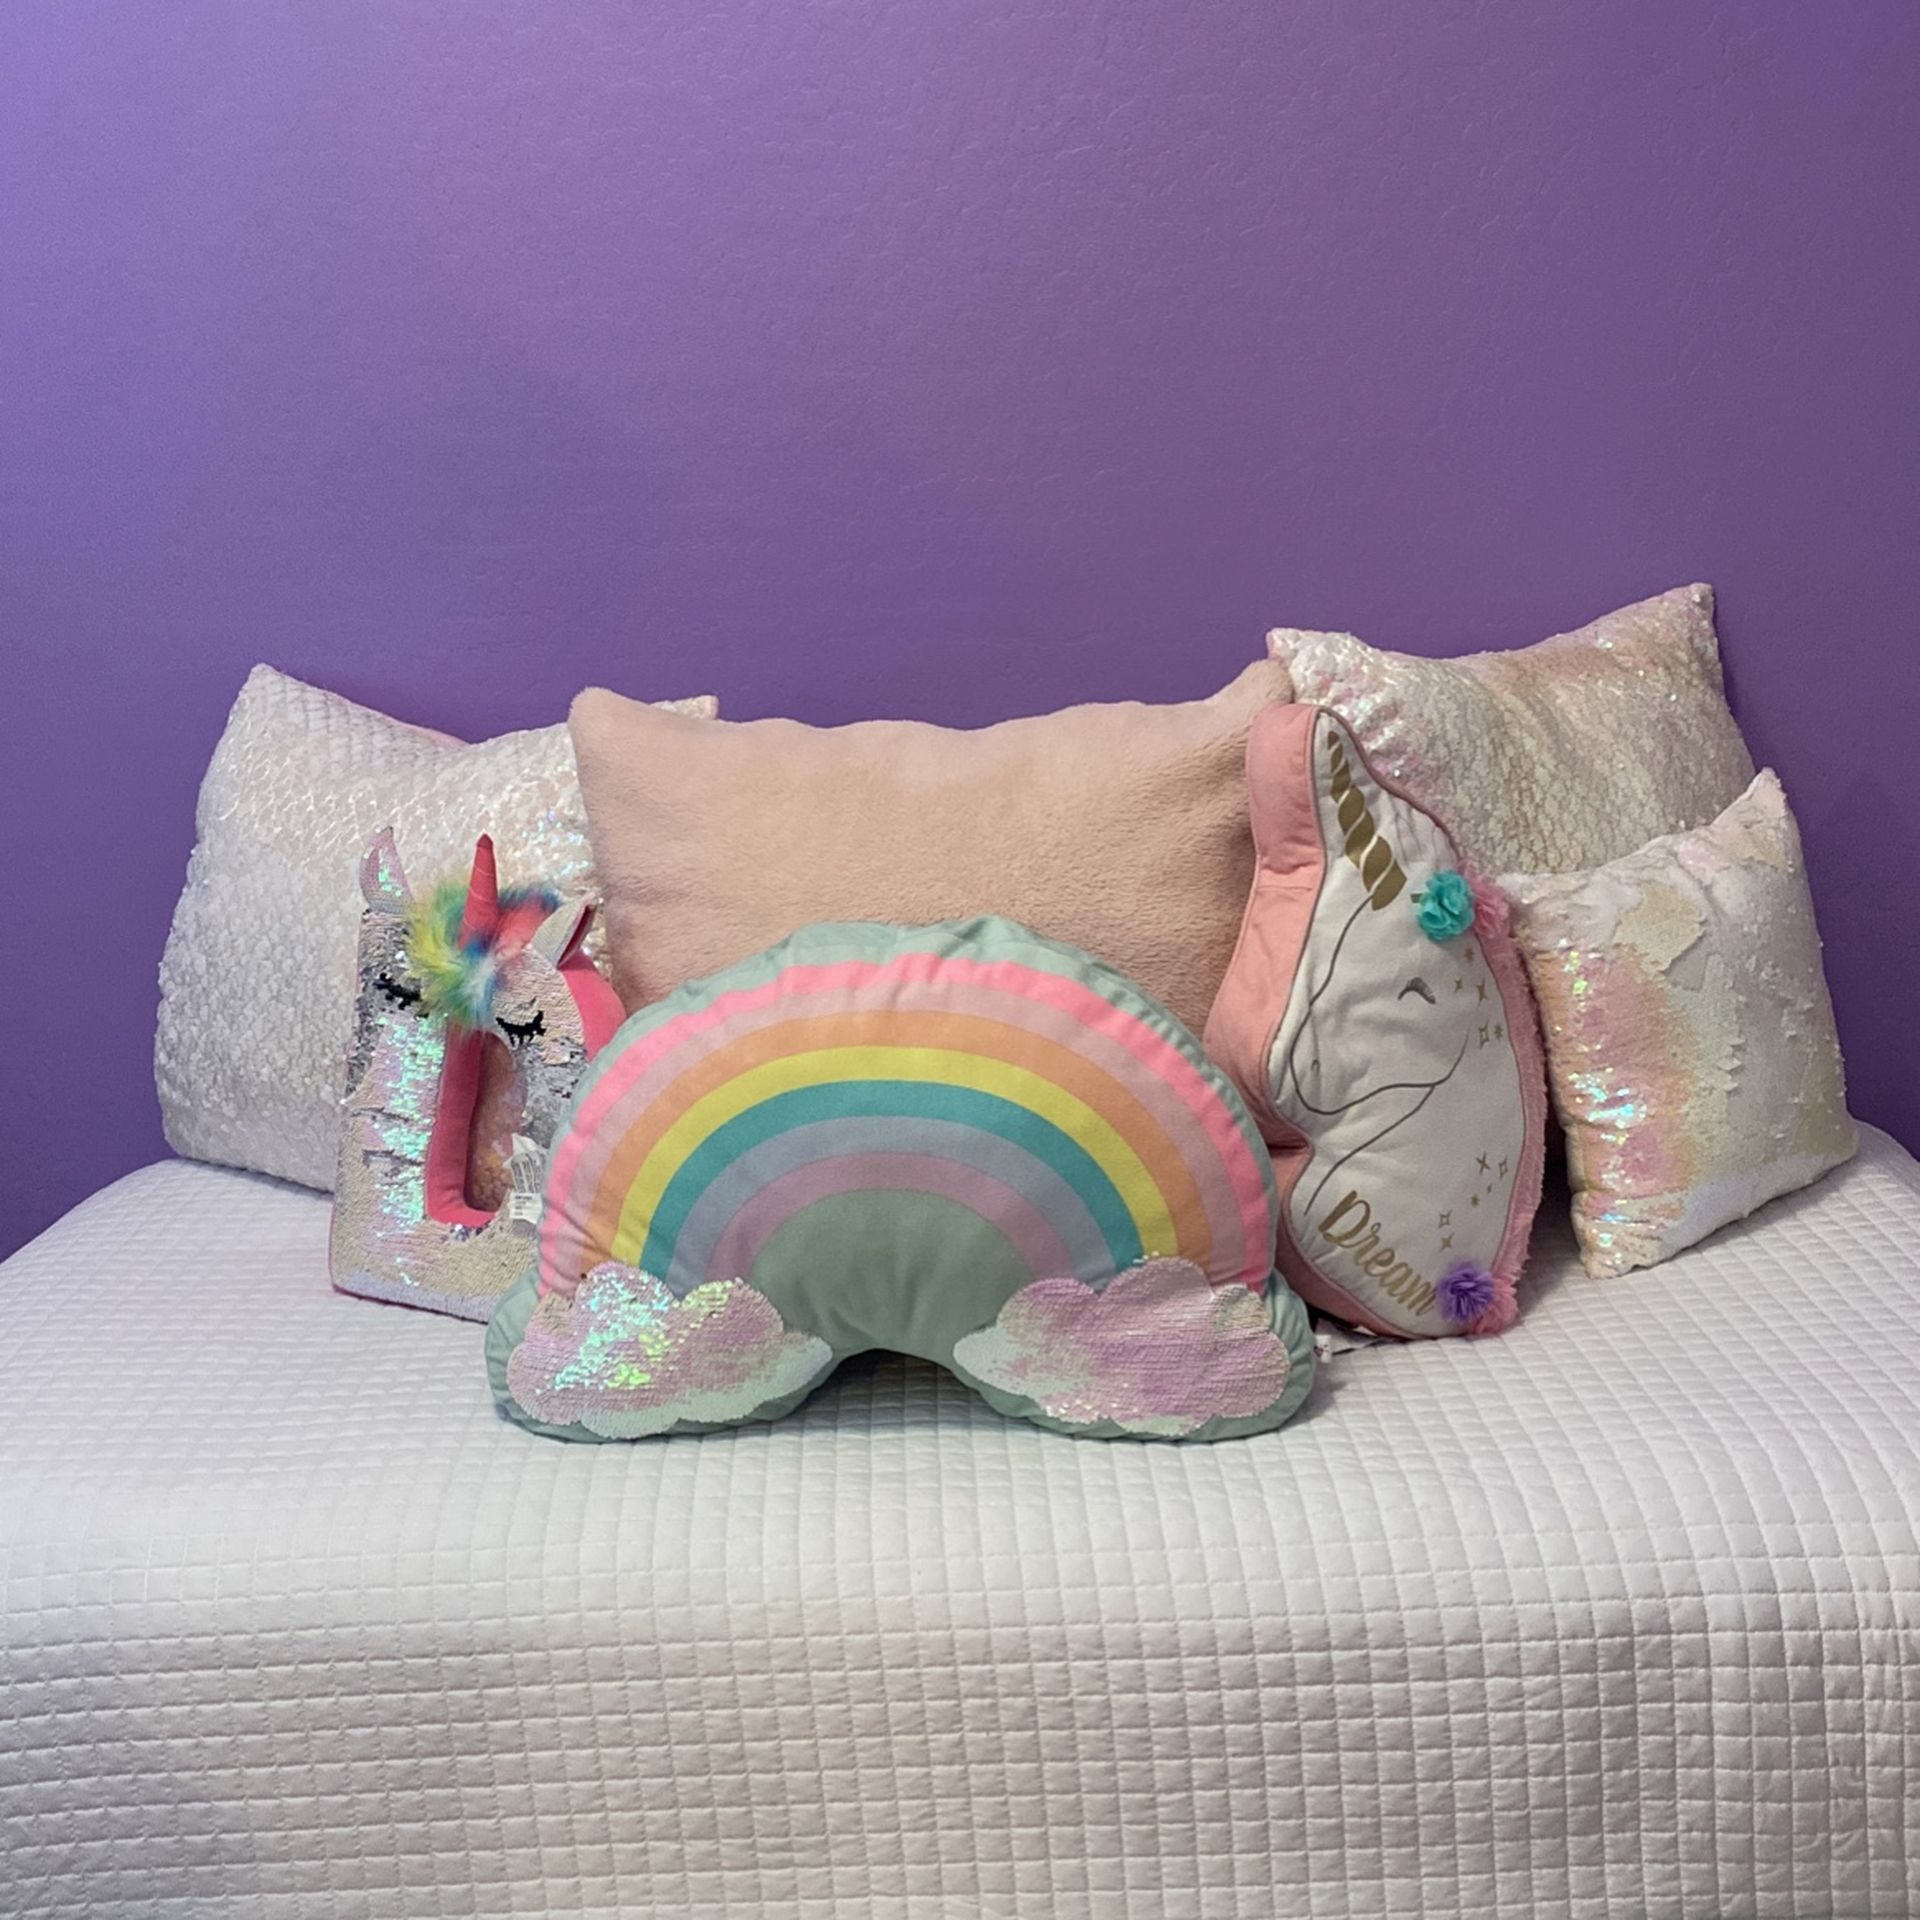 Girls Room Decor Pillows And Pictures Stoney Clover Rainbow Unicorns 